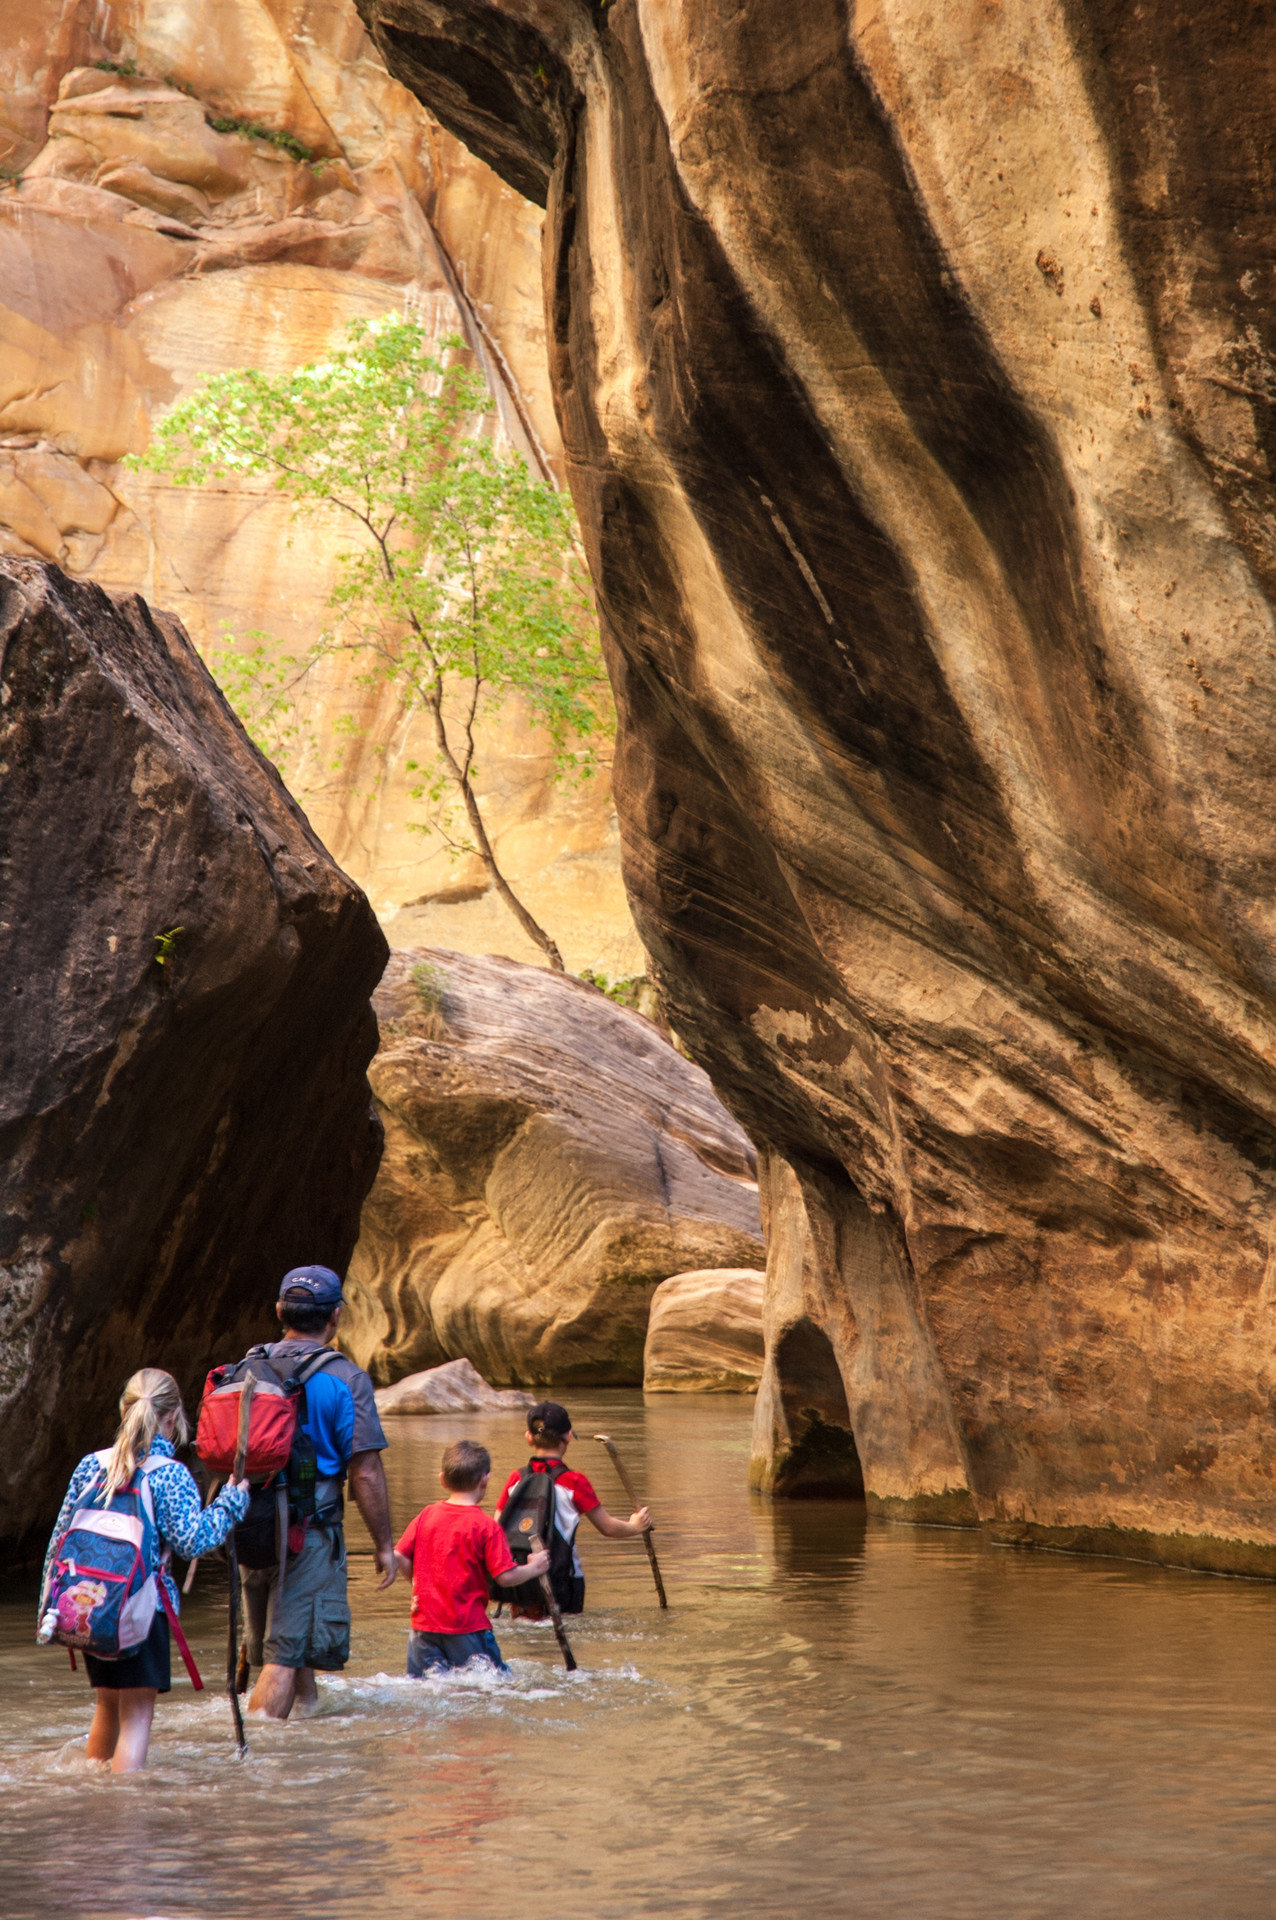 Health + Wellness Trip Ideas outdoor rock landform geographical feature Nature cave canyon Adventure outdoor recreation wadi recreation formation rock climbing tree stone